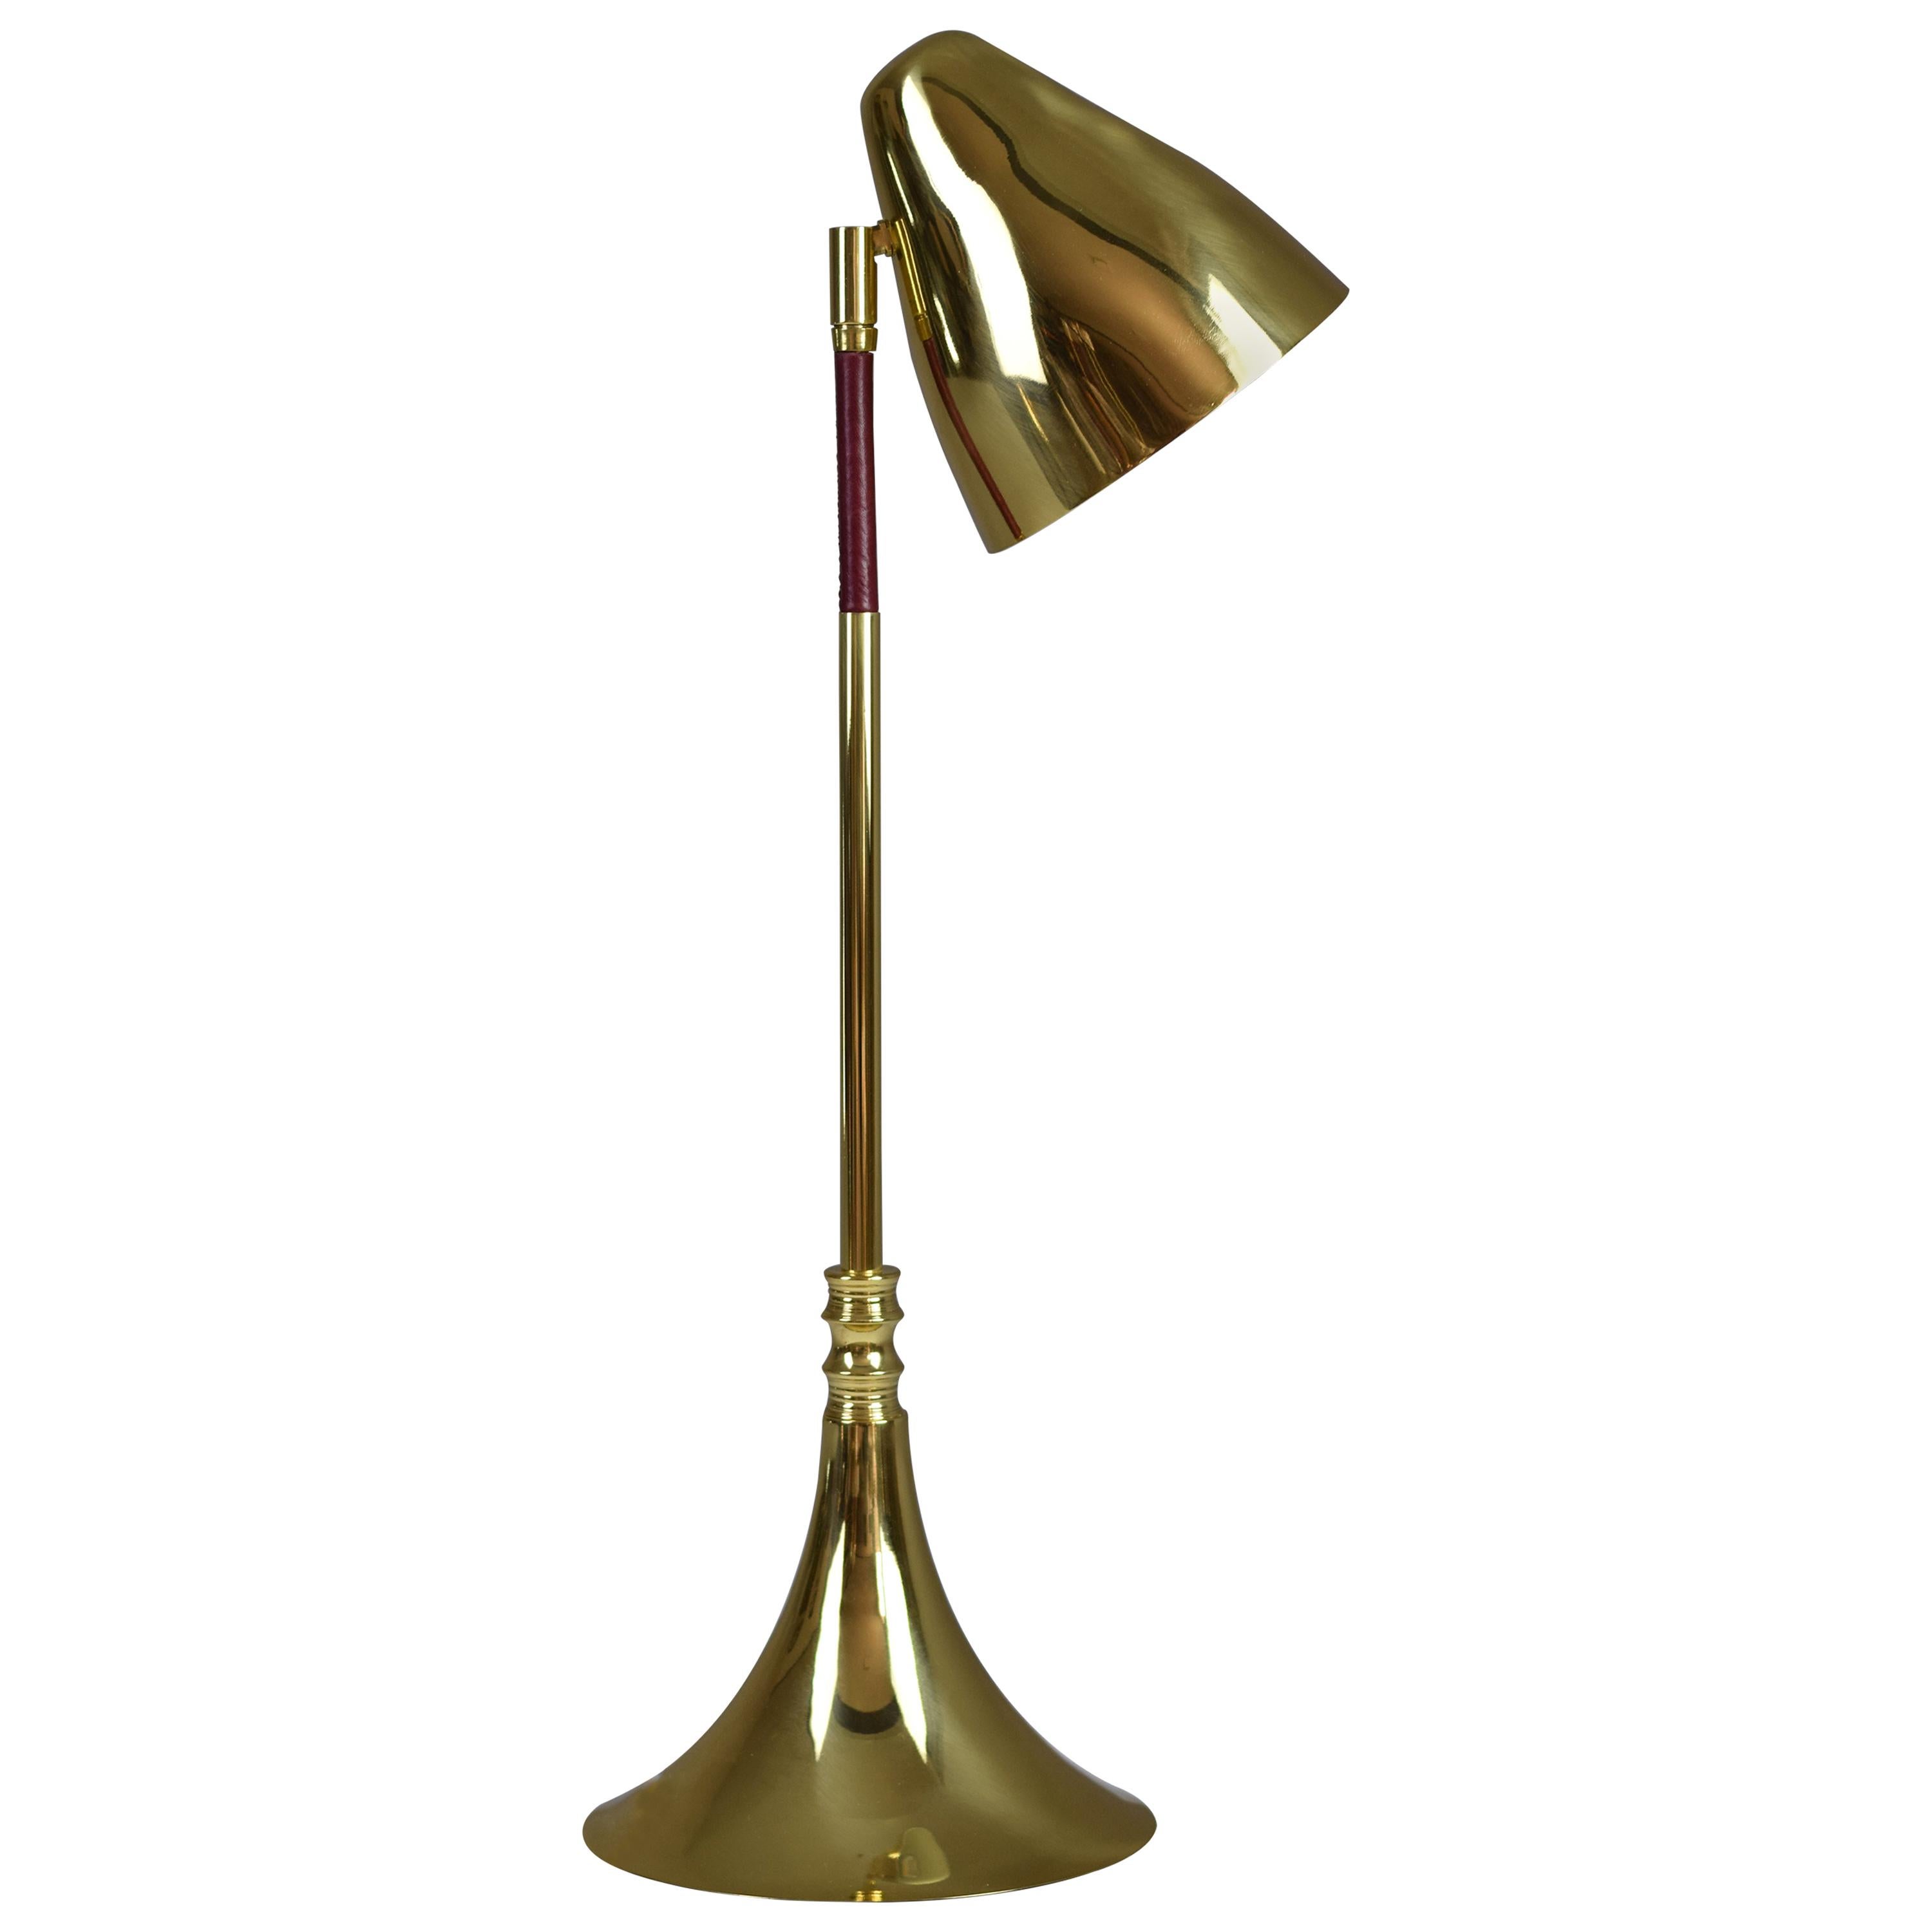 Adria-t1 Brass Table Lamp, Flow 2 Collection